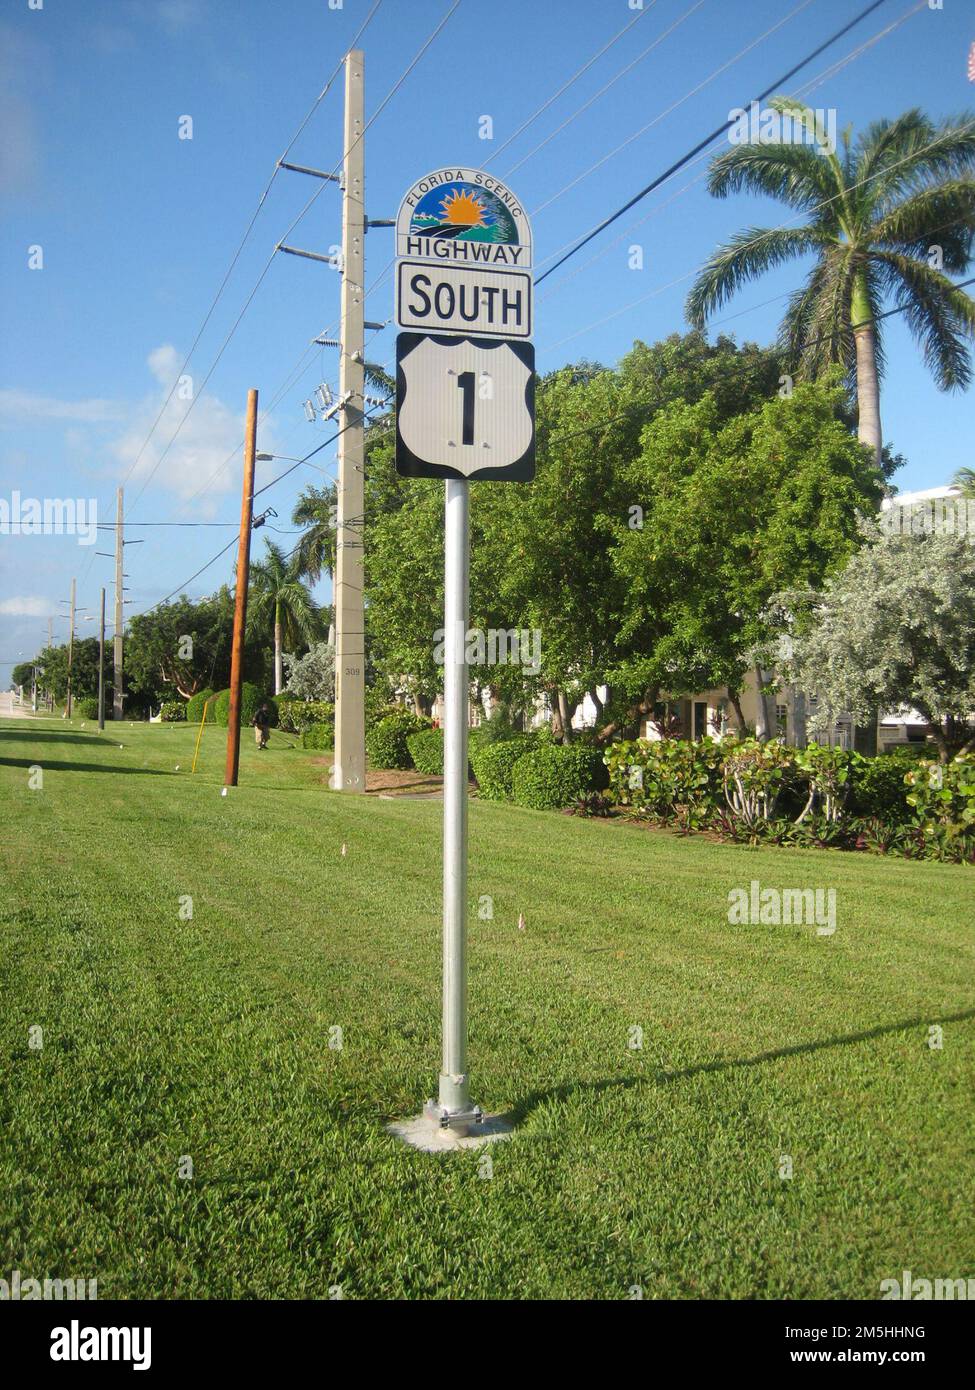 Florida Keys Scenic Highway - This Way to the Florida Keys Scenic Highway. The Florida Scenic Highway Program provides unique wayfinding signs to ensure travelers never get lost. These half-moon-shaped signs proudly display the Florida sunshine rising over another scenic highway. This sign along with the highway route number (US 1) that it is joined to clearly shows the way for the Florida Keys Scenic Highway. Location: Florida (24.572° N 81.747° W) Stock Photo